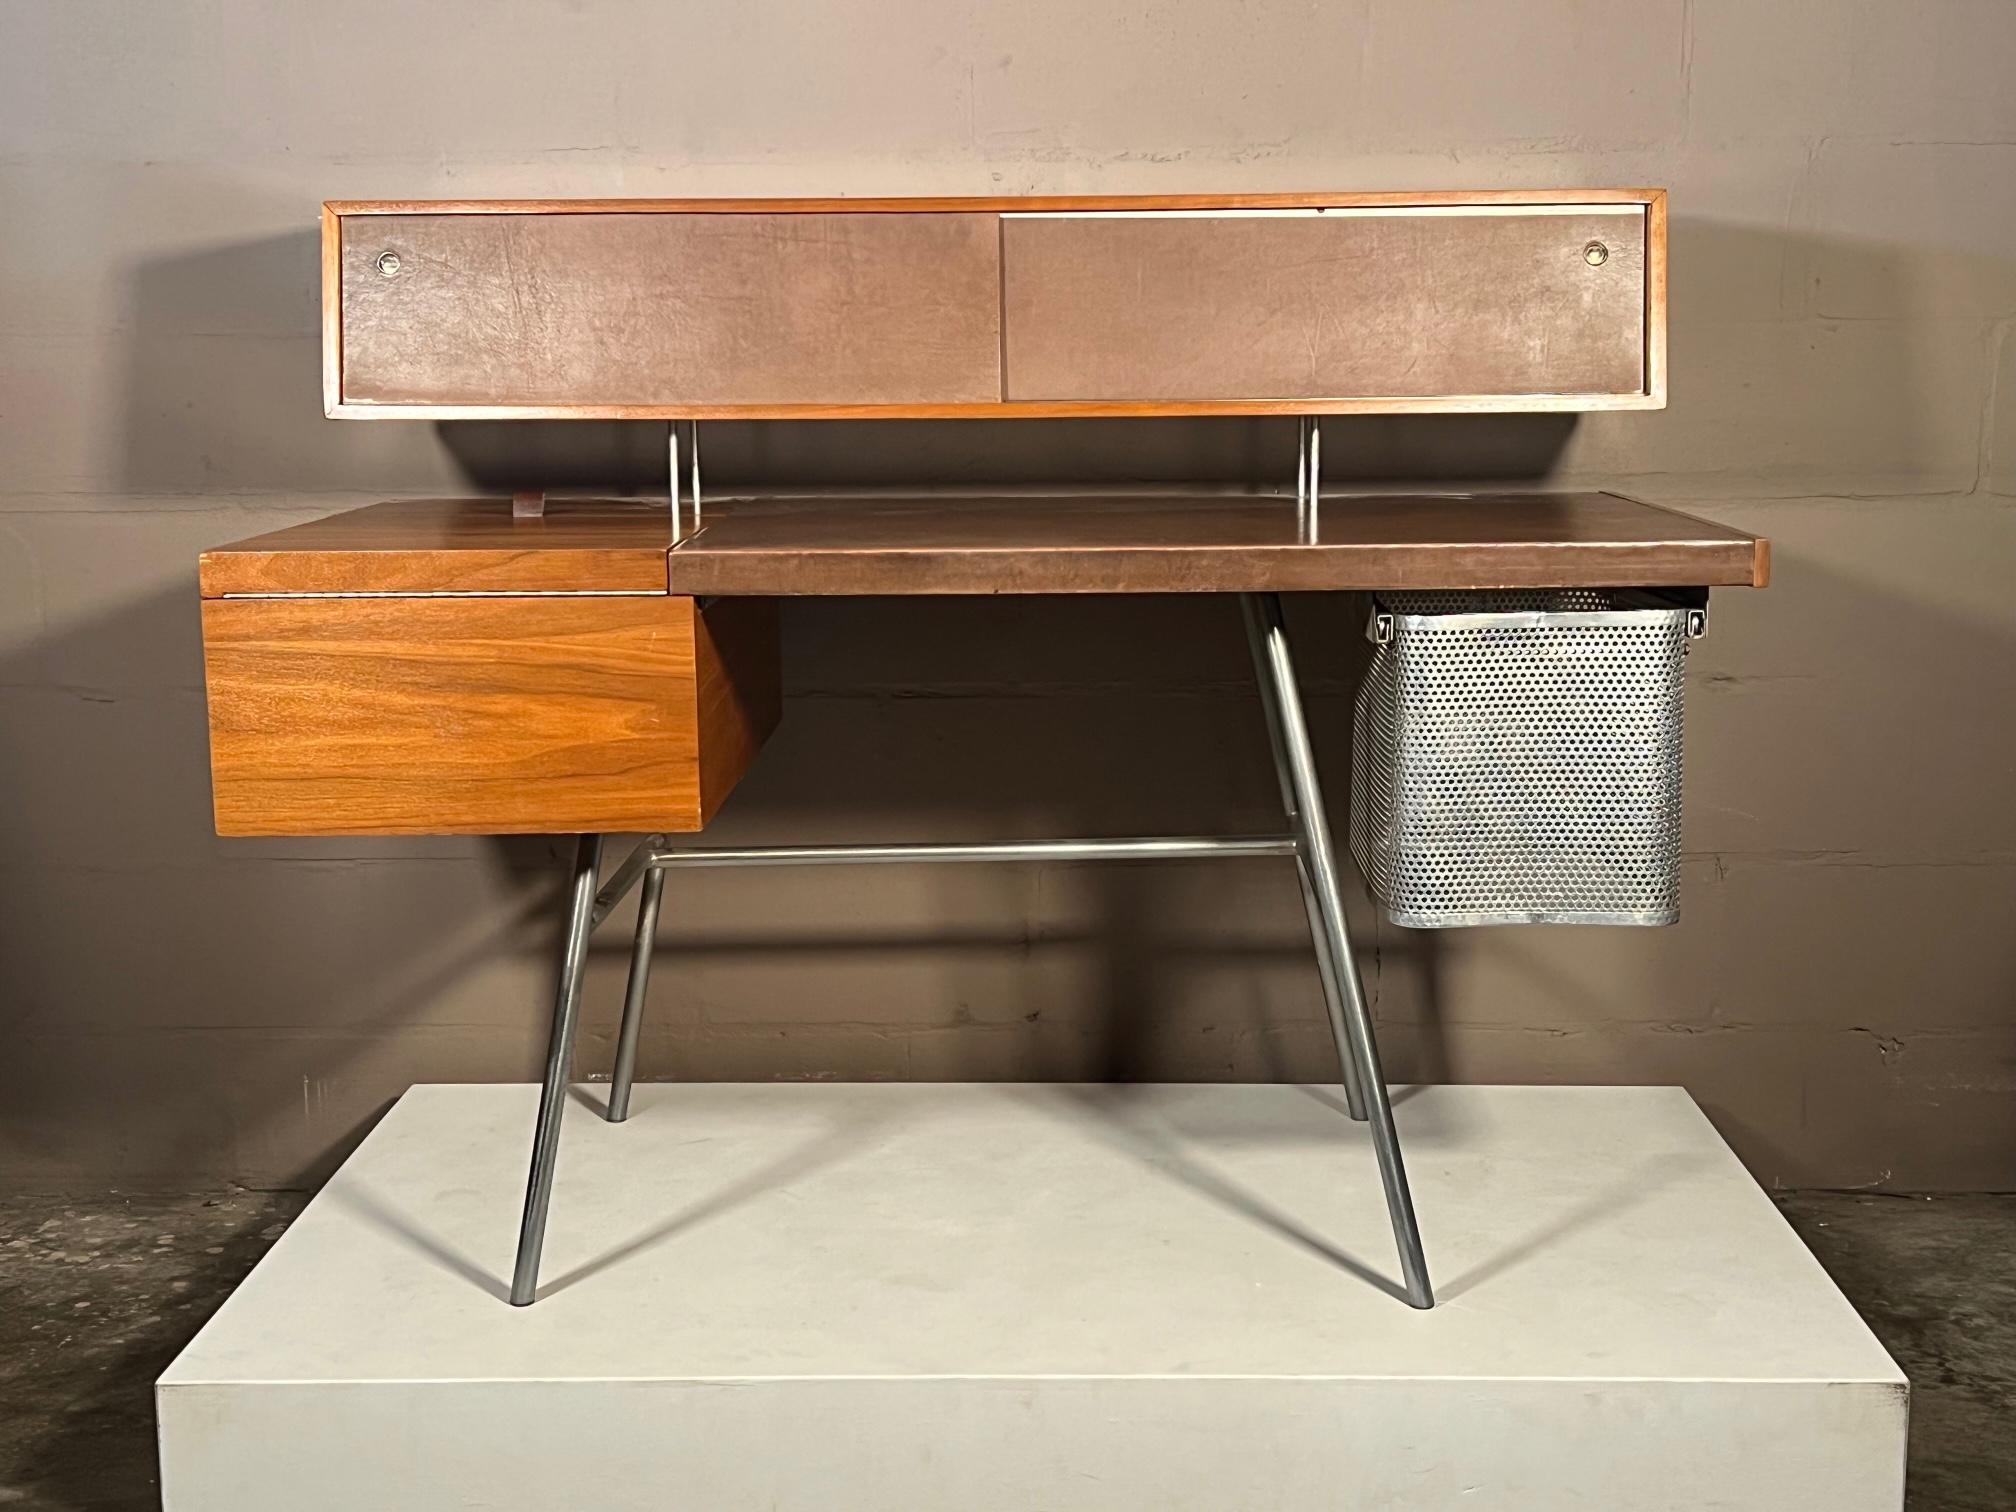 George Nelson for Herman Miller desk model # 4658, in walnut, steel and leather, ca' late 1940's. A Classic Postwar modernist desk made of walnut with steel legs and its original brown leather writing surface, showing a beautiful patina. The desk